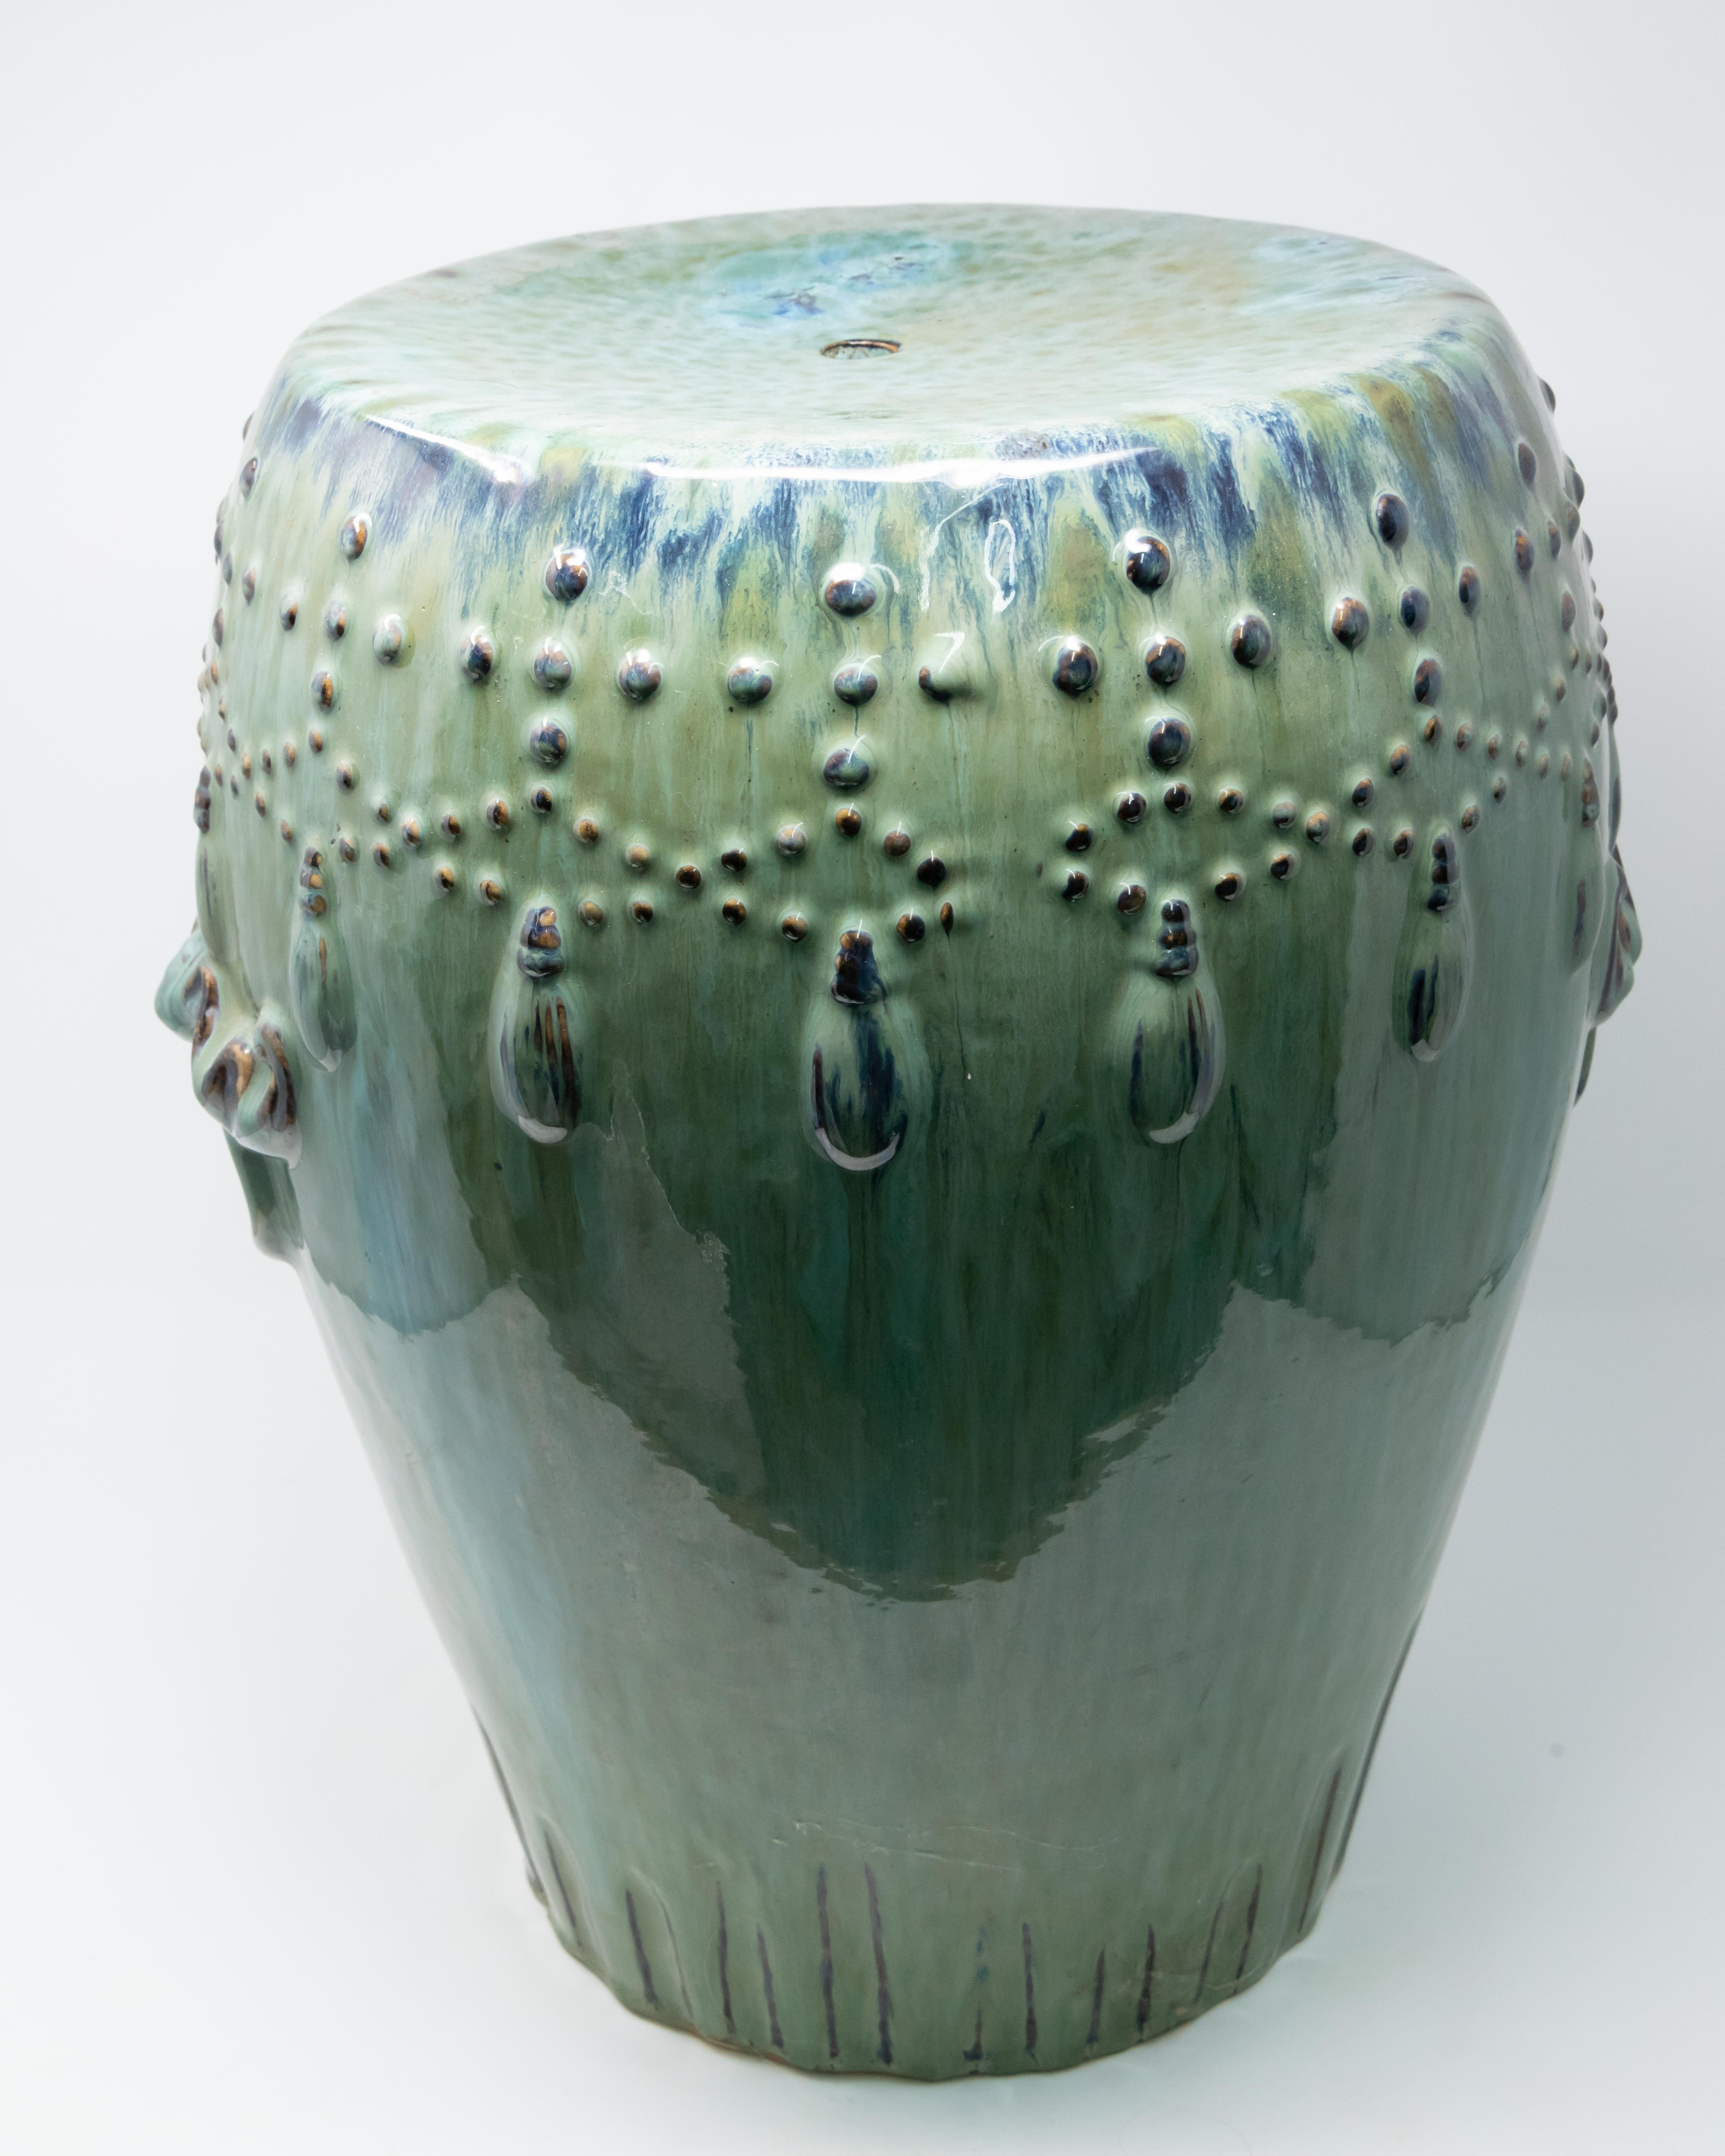 Offering this superb Asian garden stool. Hand-thrown terracotta, with striking turquoise glaze. Starts on a round bottom that gets larger as it goes up. Has to open handles to either side and a drain hole in the top. Around the top has raised dots